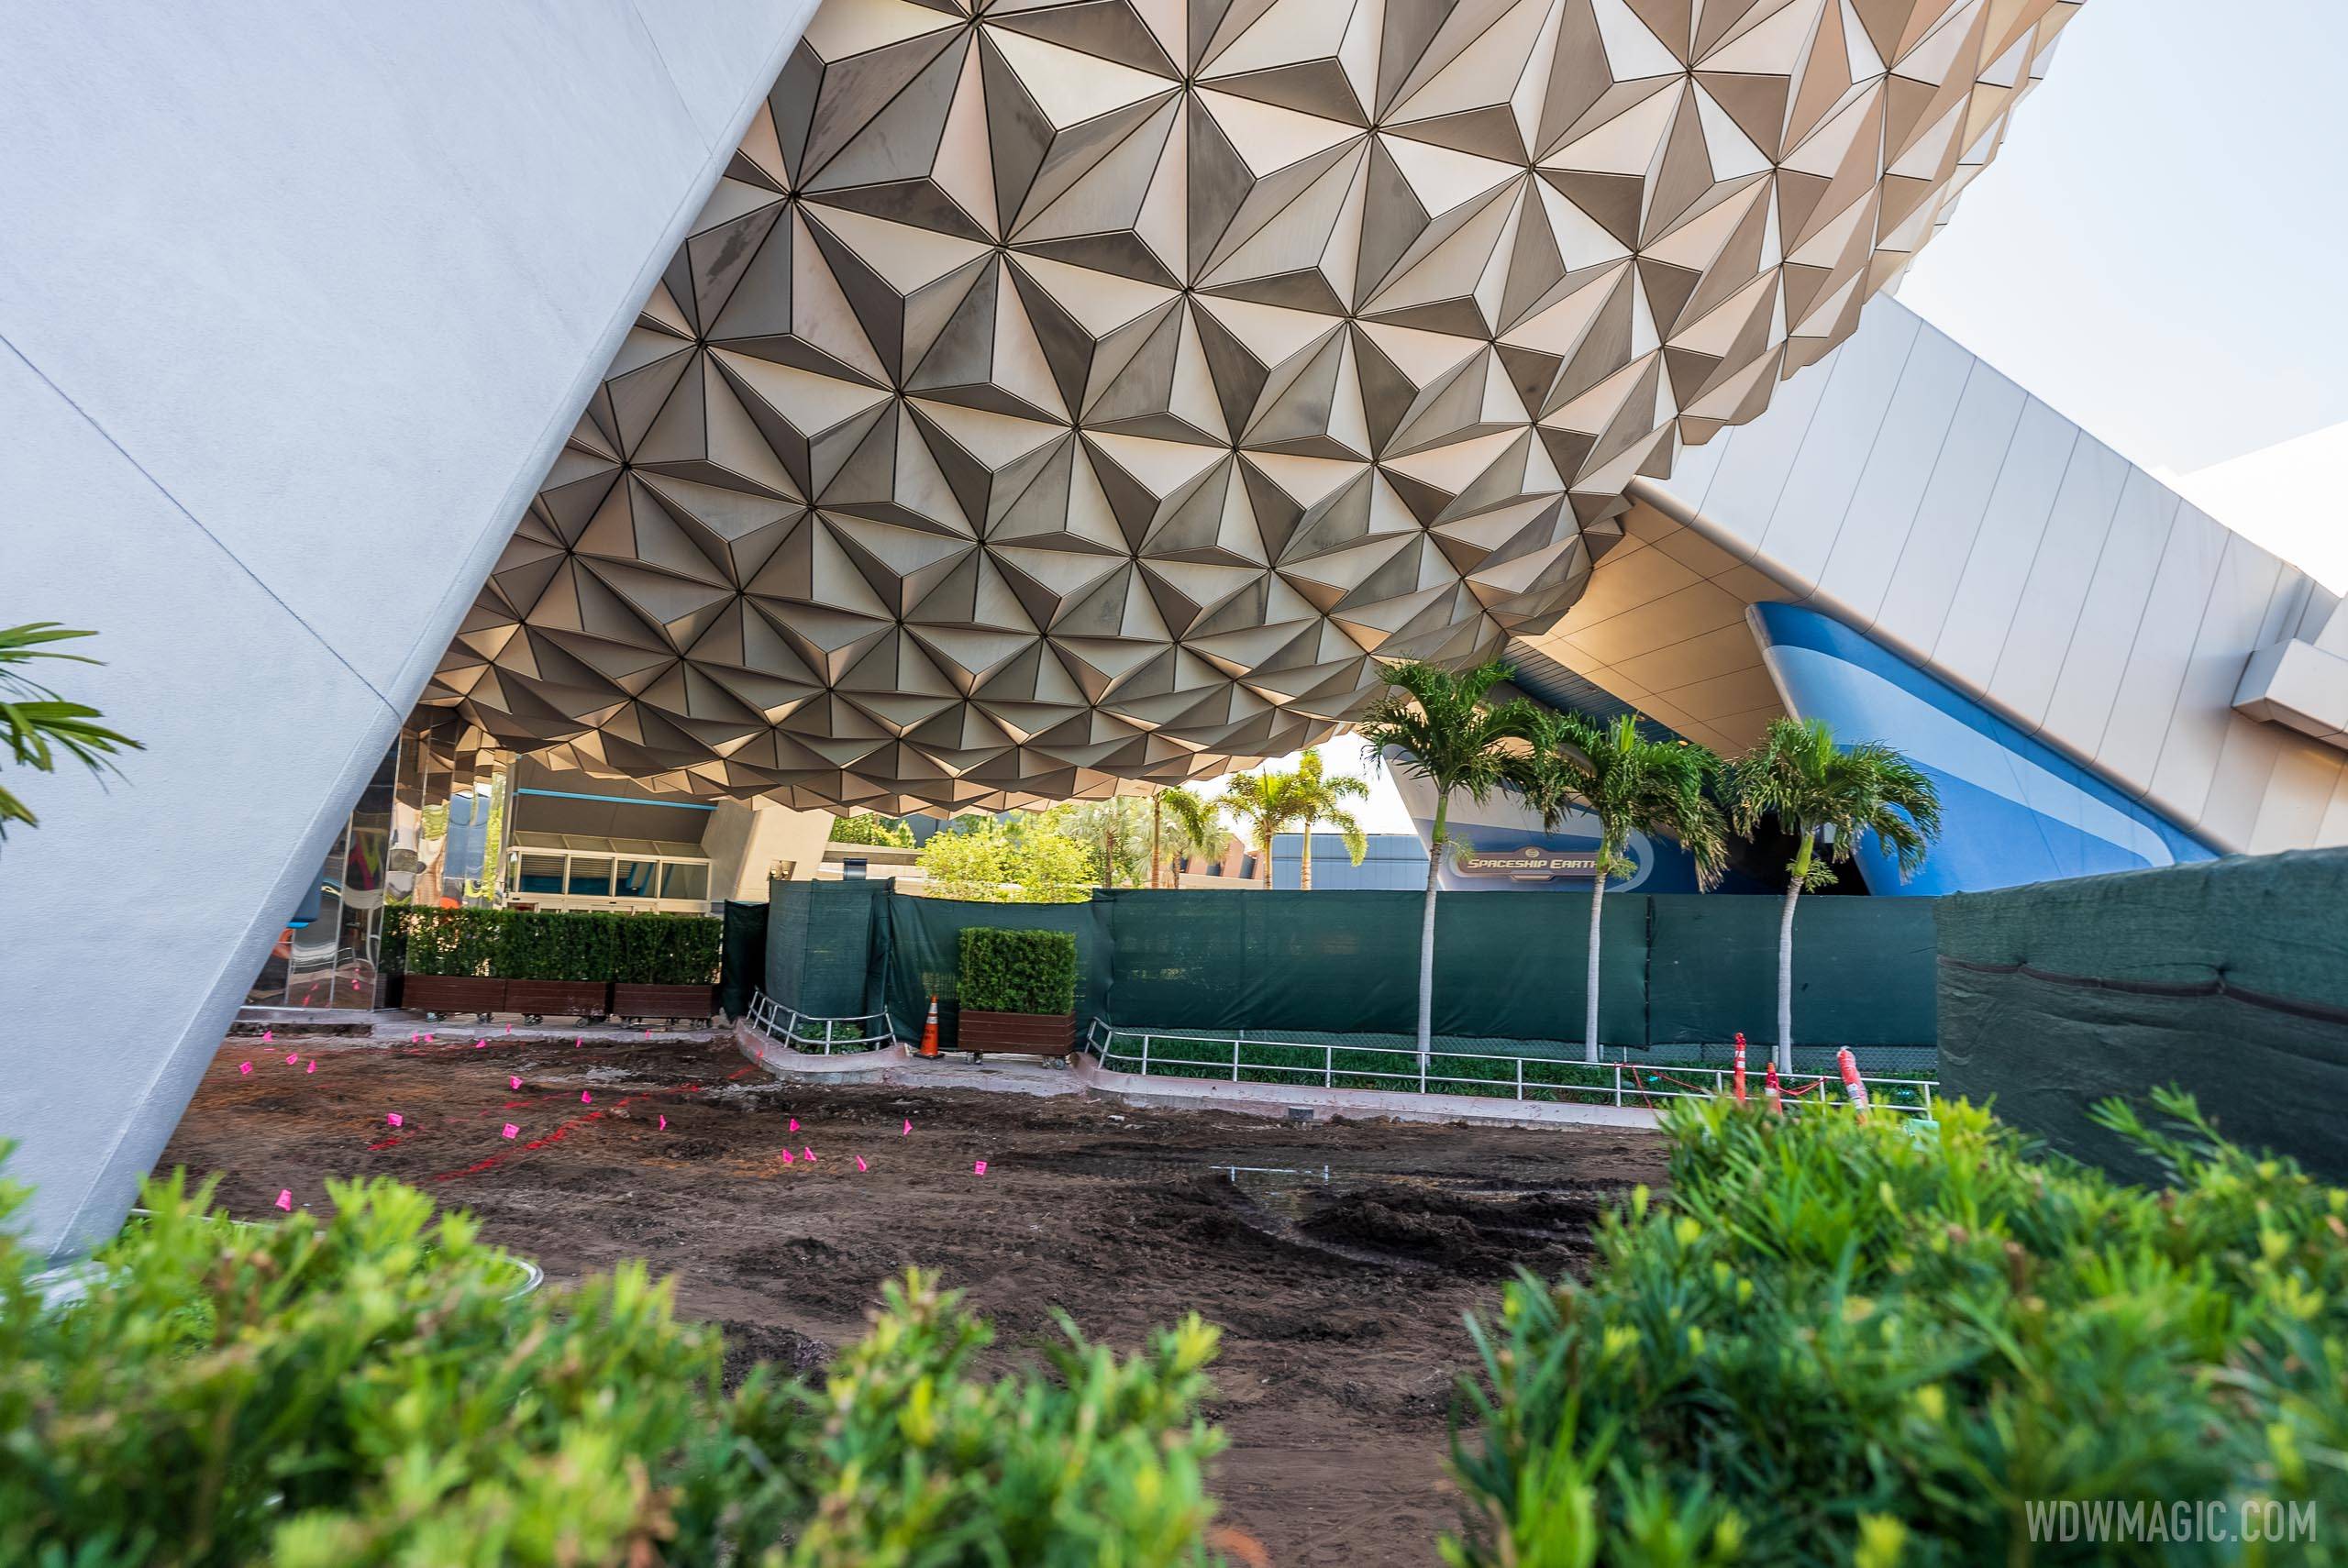 A look at the concrete work underway beneath Spaceship Earth alongside 'Pin Traders and Camera Center'